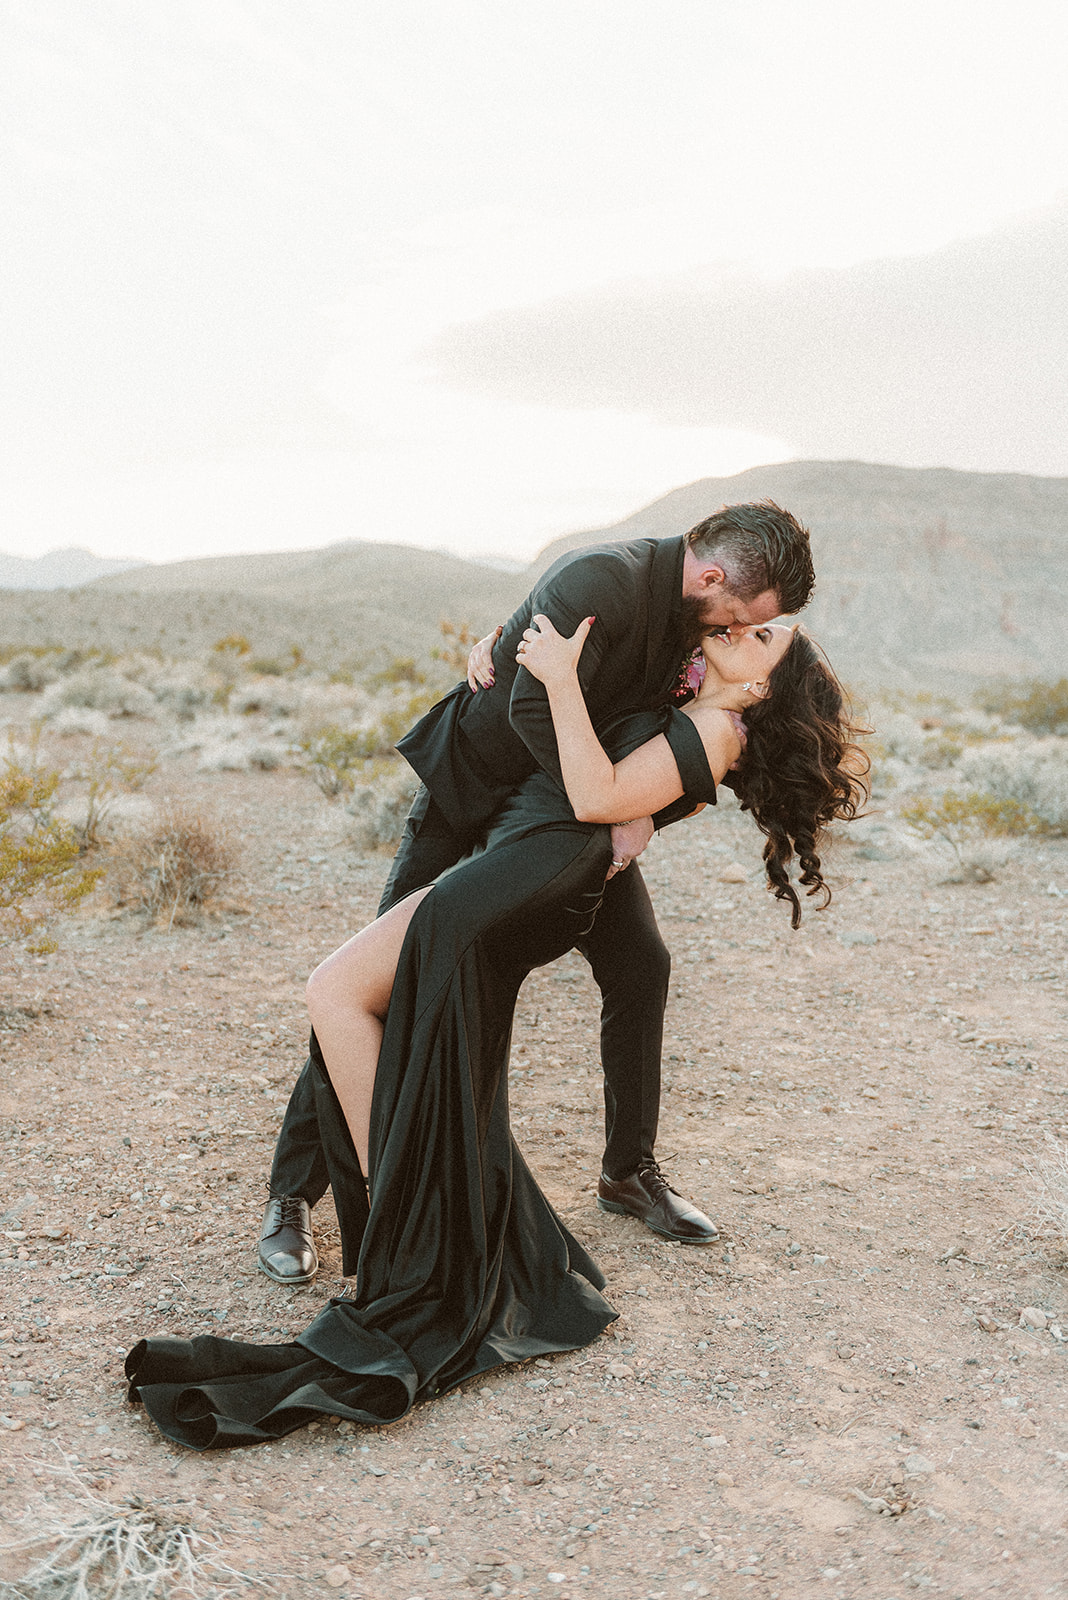 Groom dipping the bride as they lean in for a kiss during their elopement shoot in Las Vegas